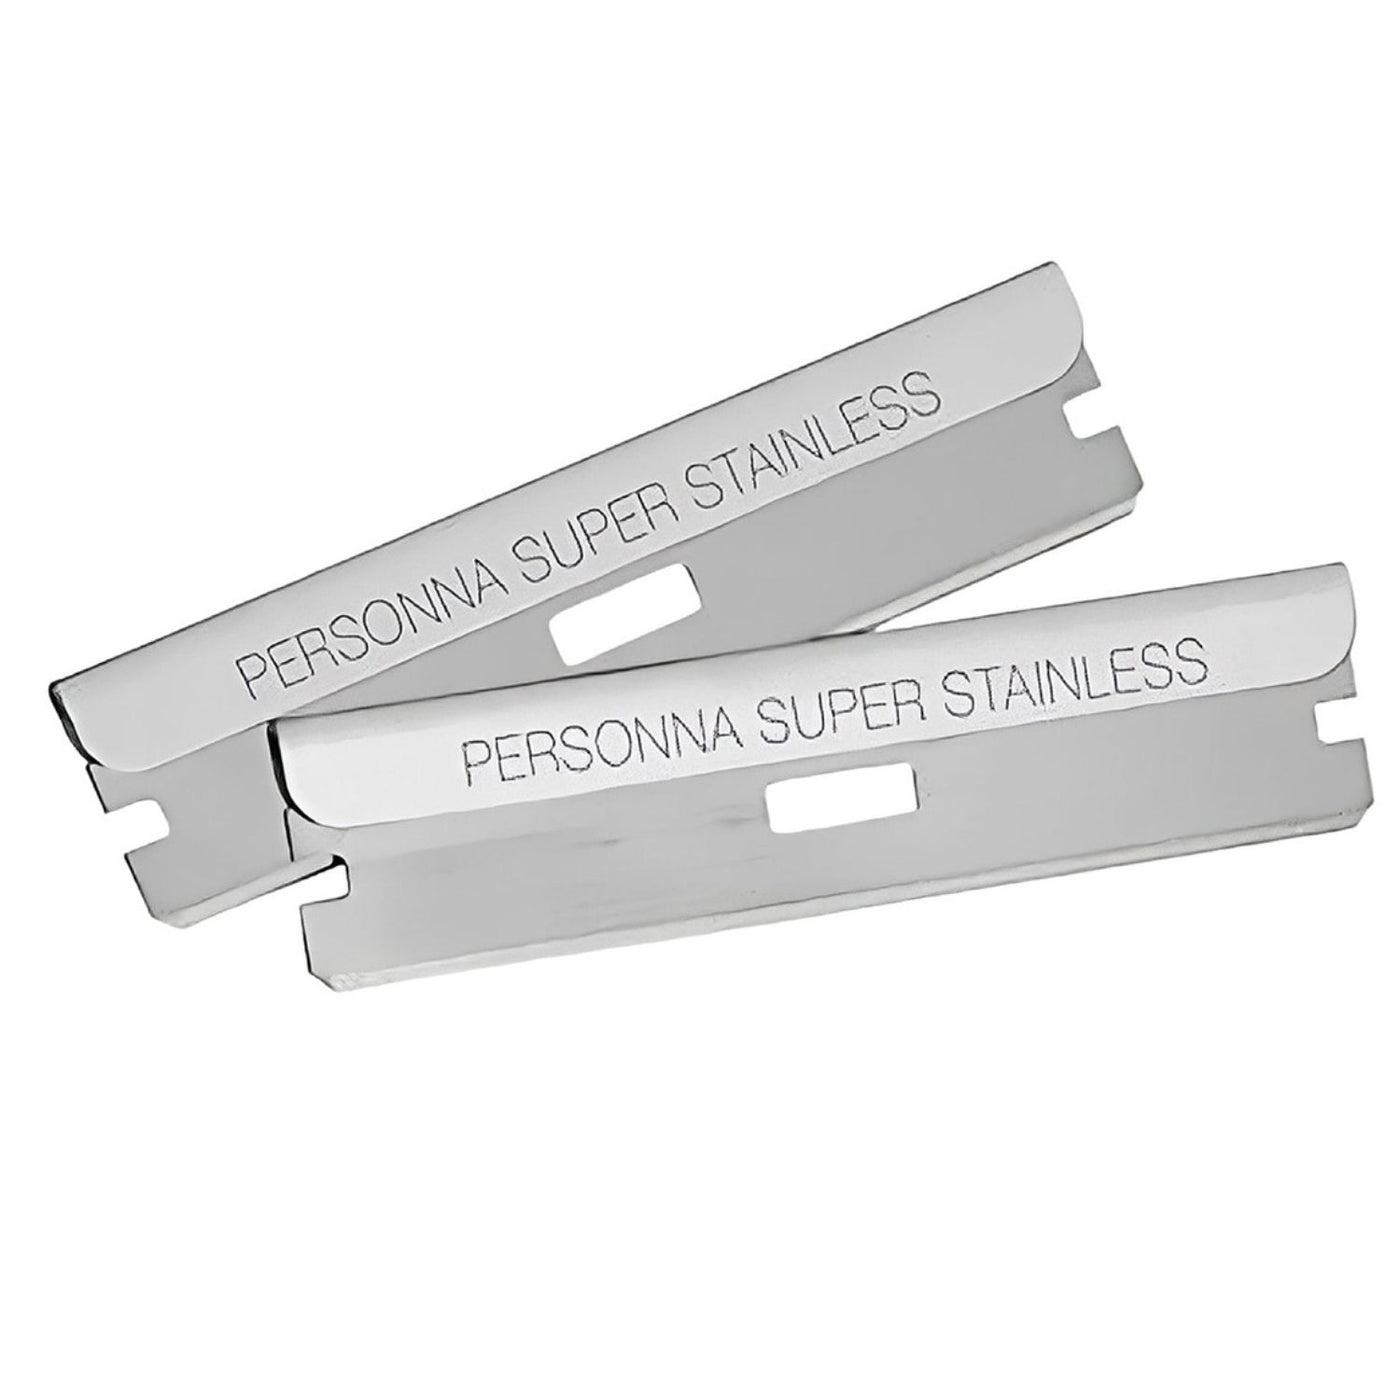  Personna Shavette Razor Blades by Dovo sold by Naked Armor Razors